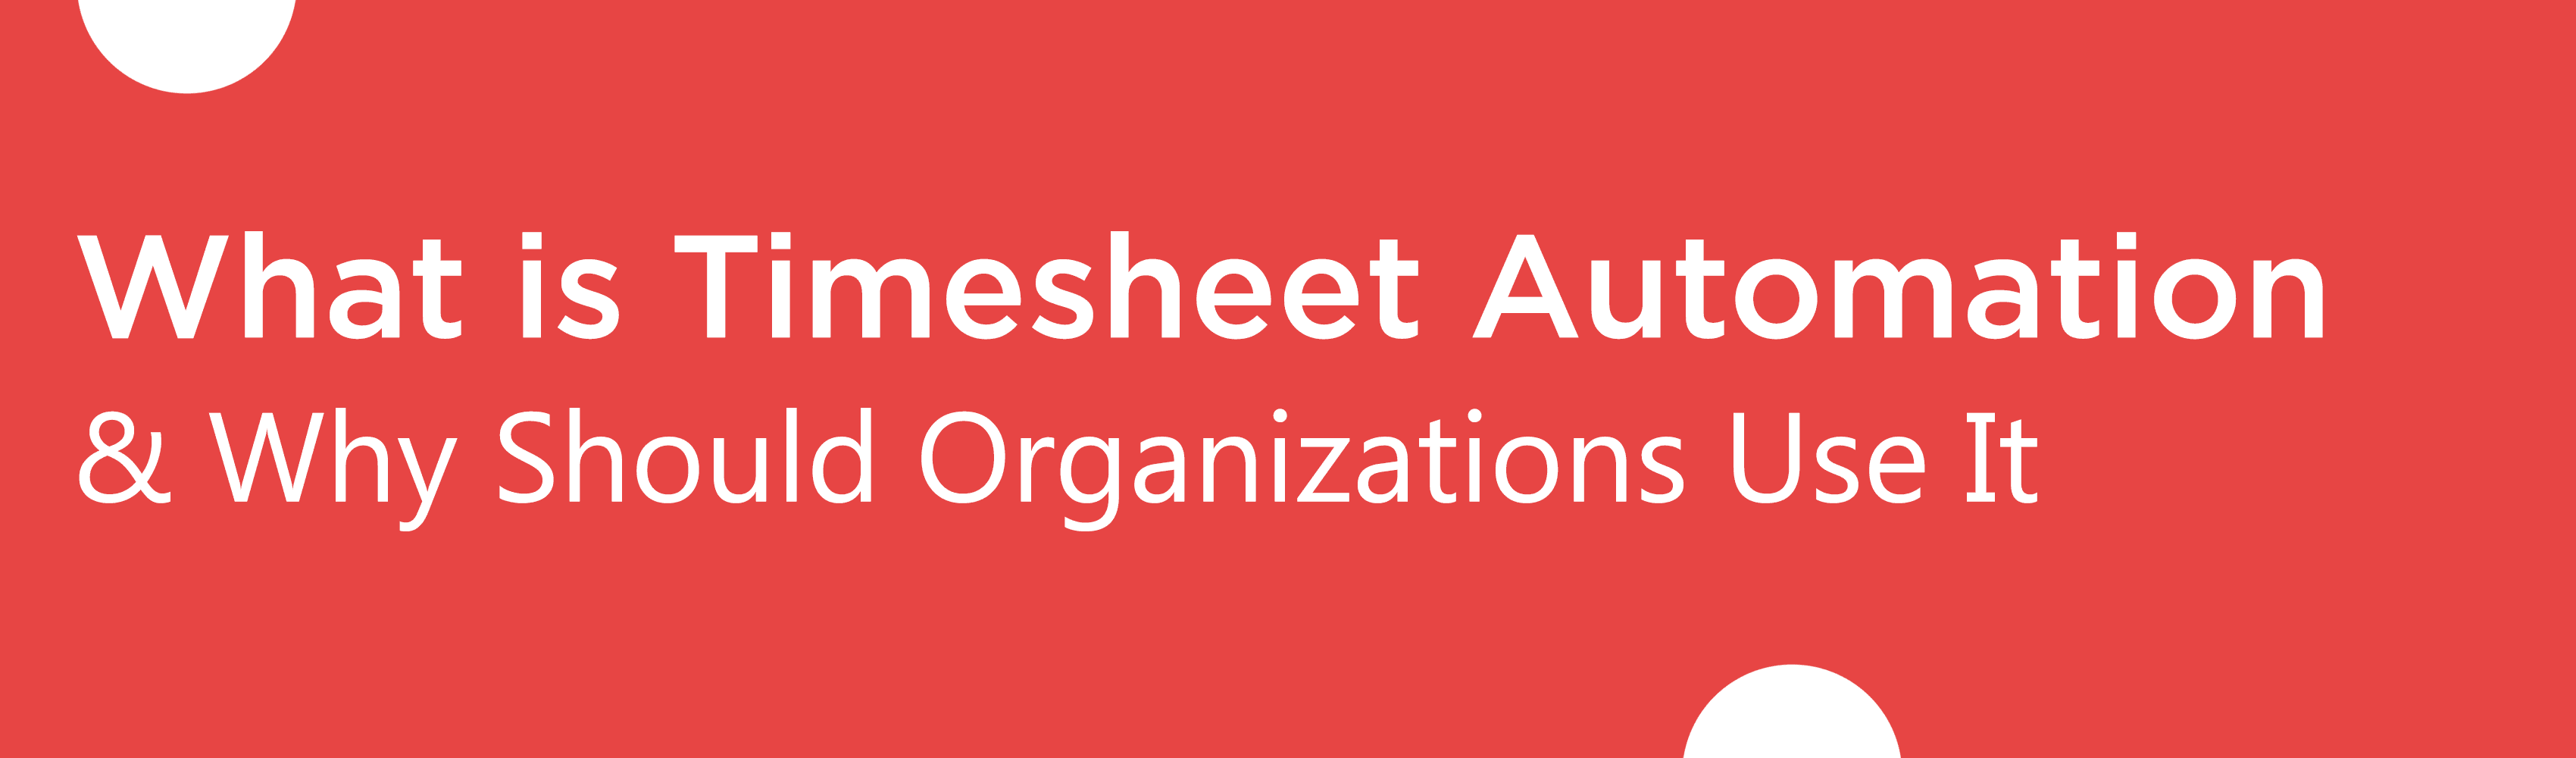 What is Timesheet Automation & Why Should Organizations Use It